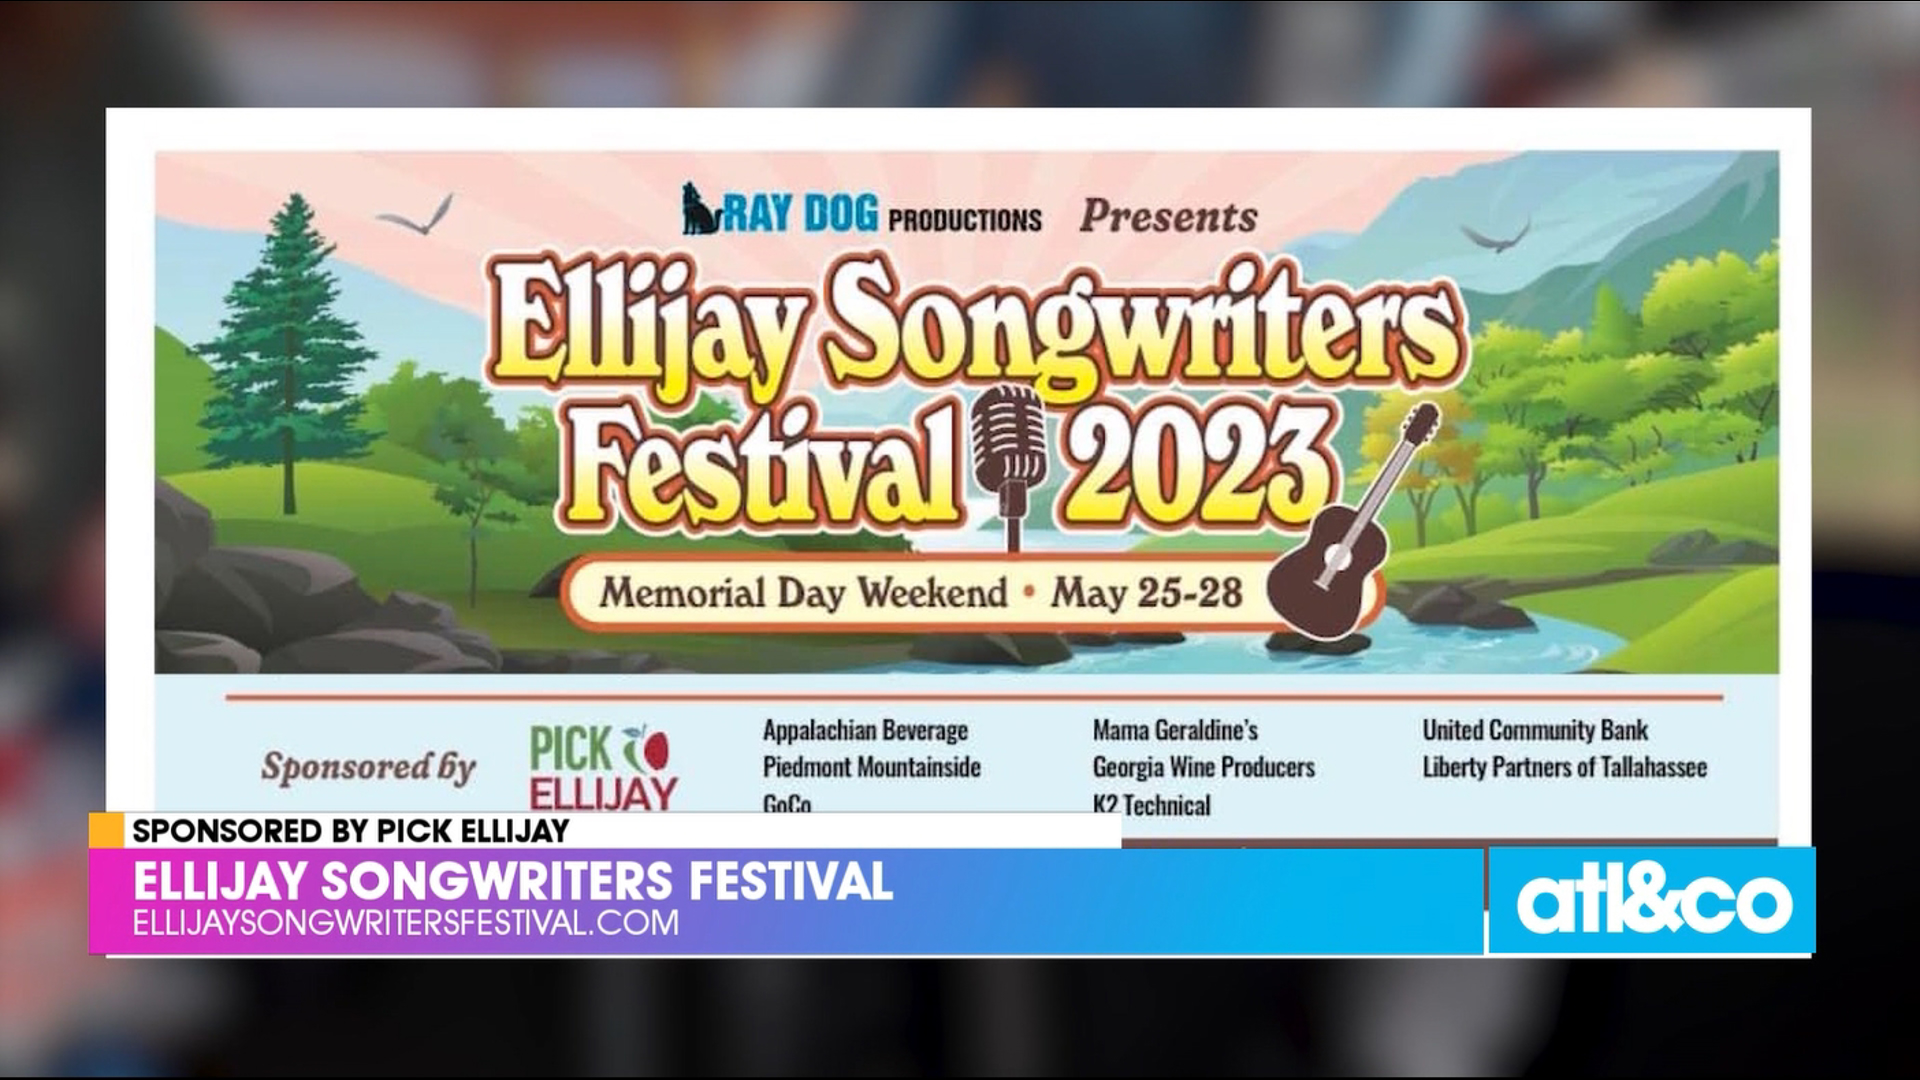 Check out the Ellijay Songwriters Festival this Memorial Day weekend in 6 of Gilmer County's finest wineries and enjoy a performance from musician Mark Miller.